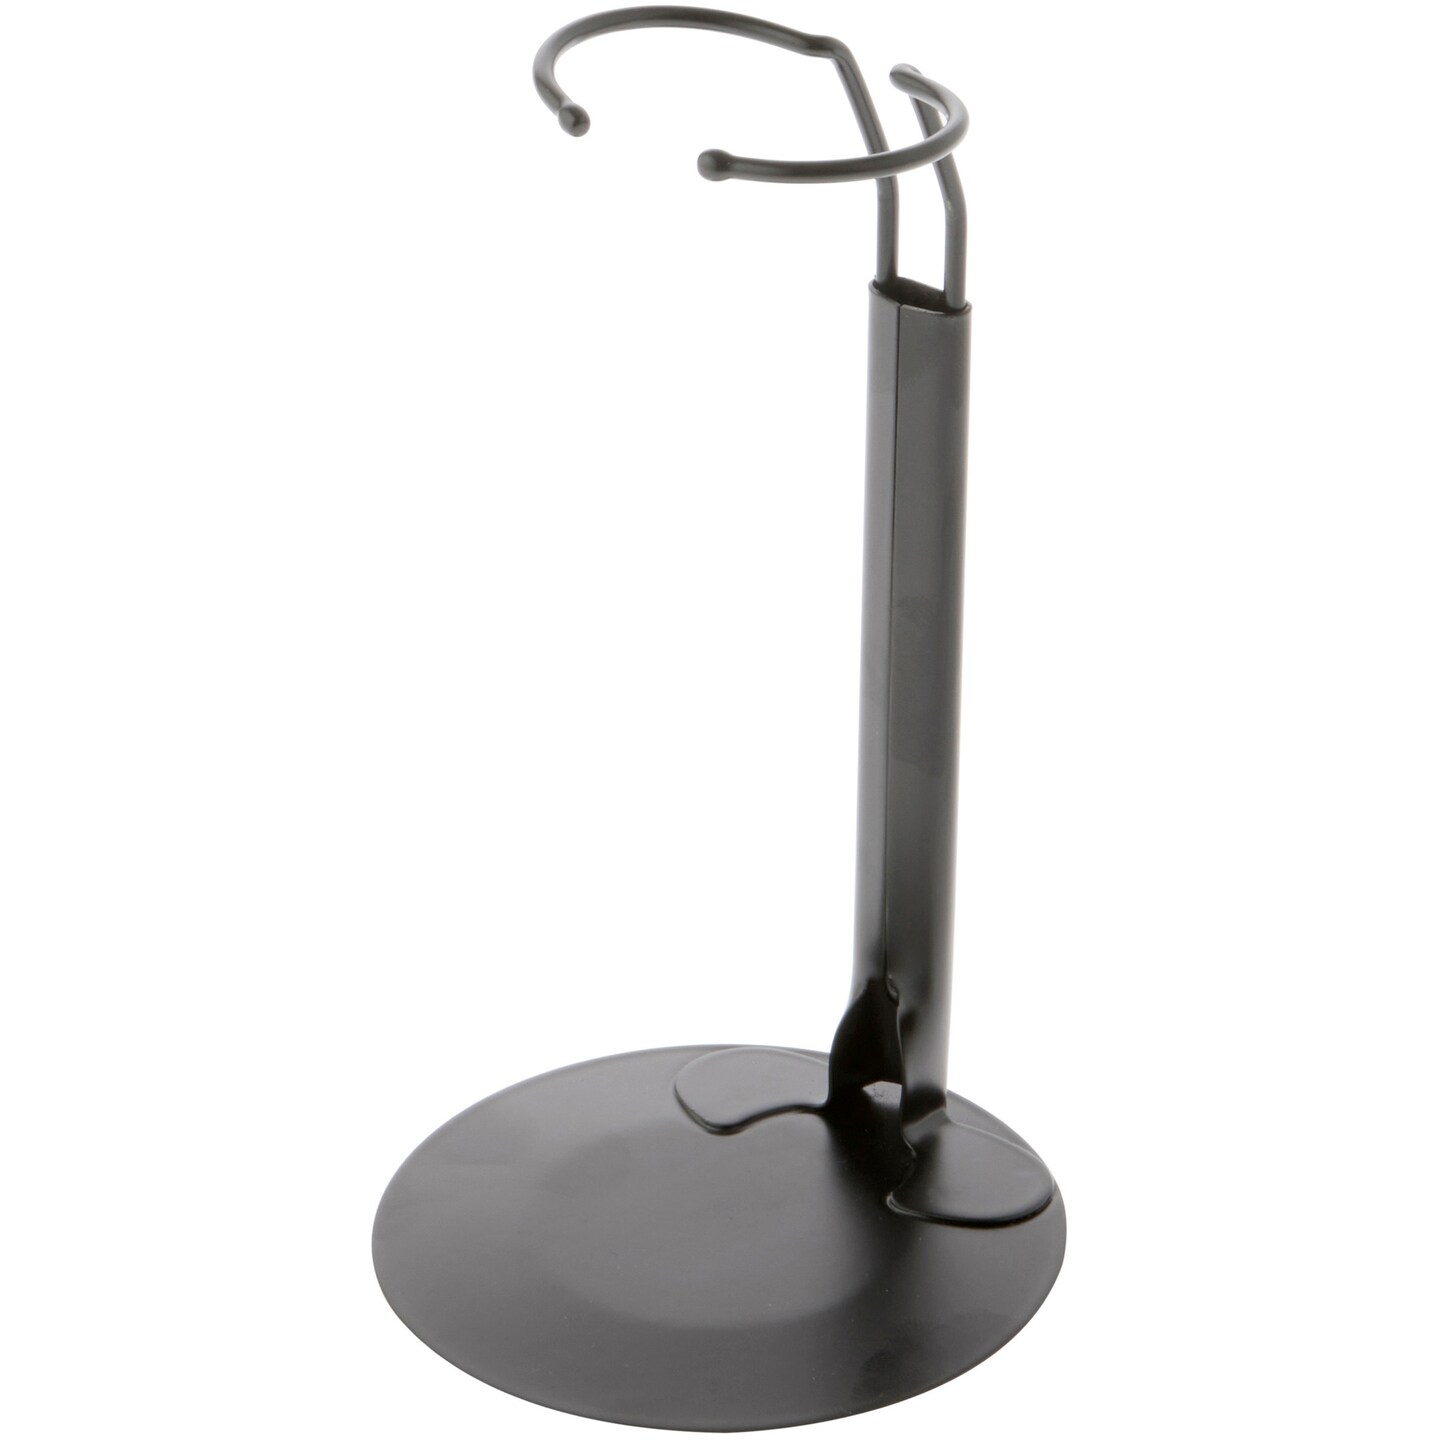 Plymor DSP-60B Black Adjustable Doll Stand, fits 10, 11, 12, 13, and 14 inch Dolls or Action Figures, Waist is 2 to 2.5 inches wide, 5.5 to 7 inches around